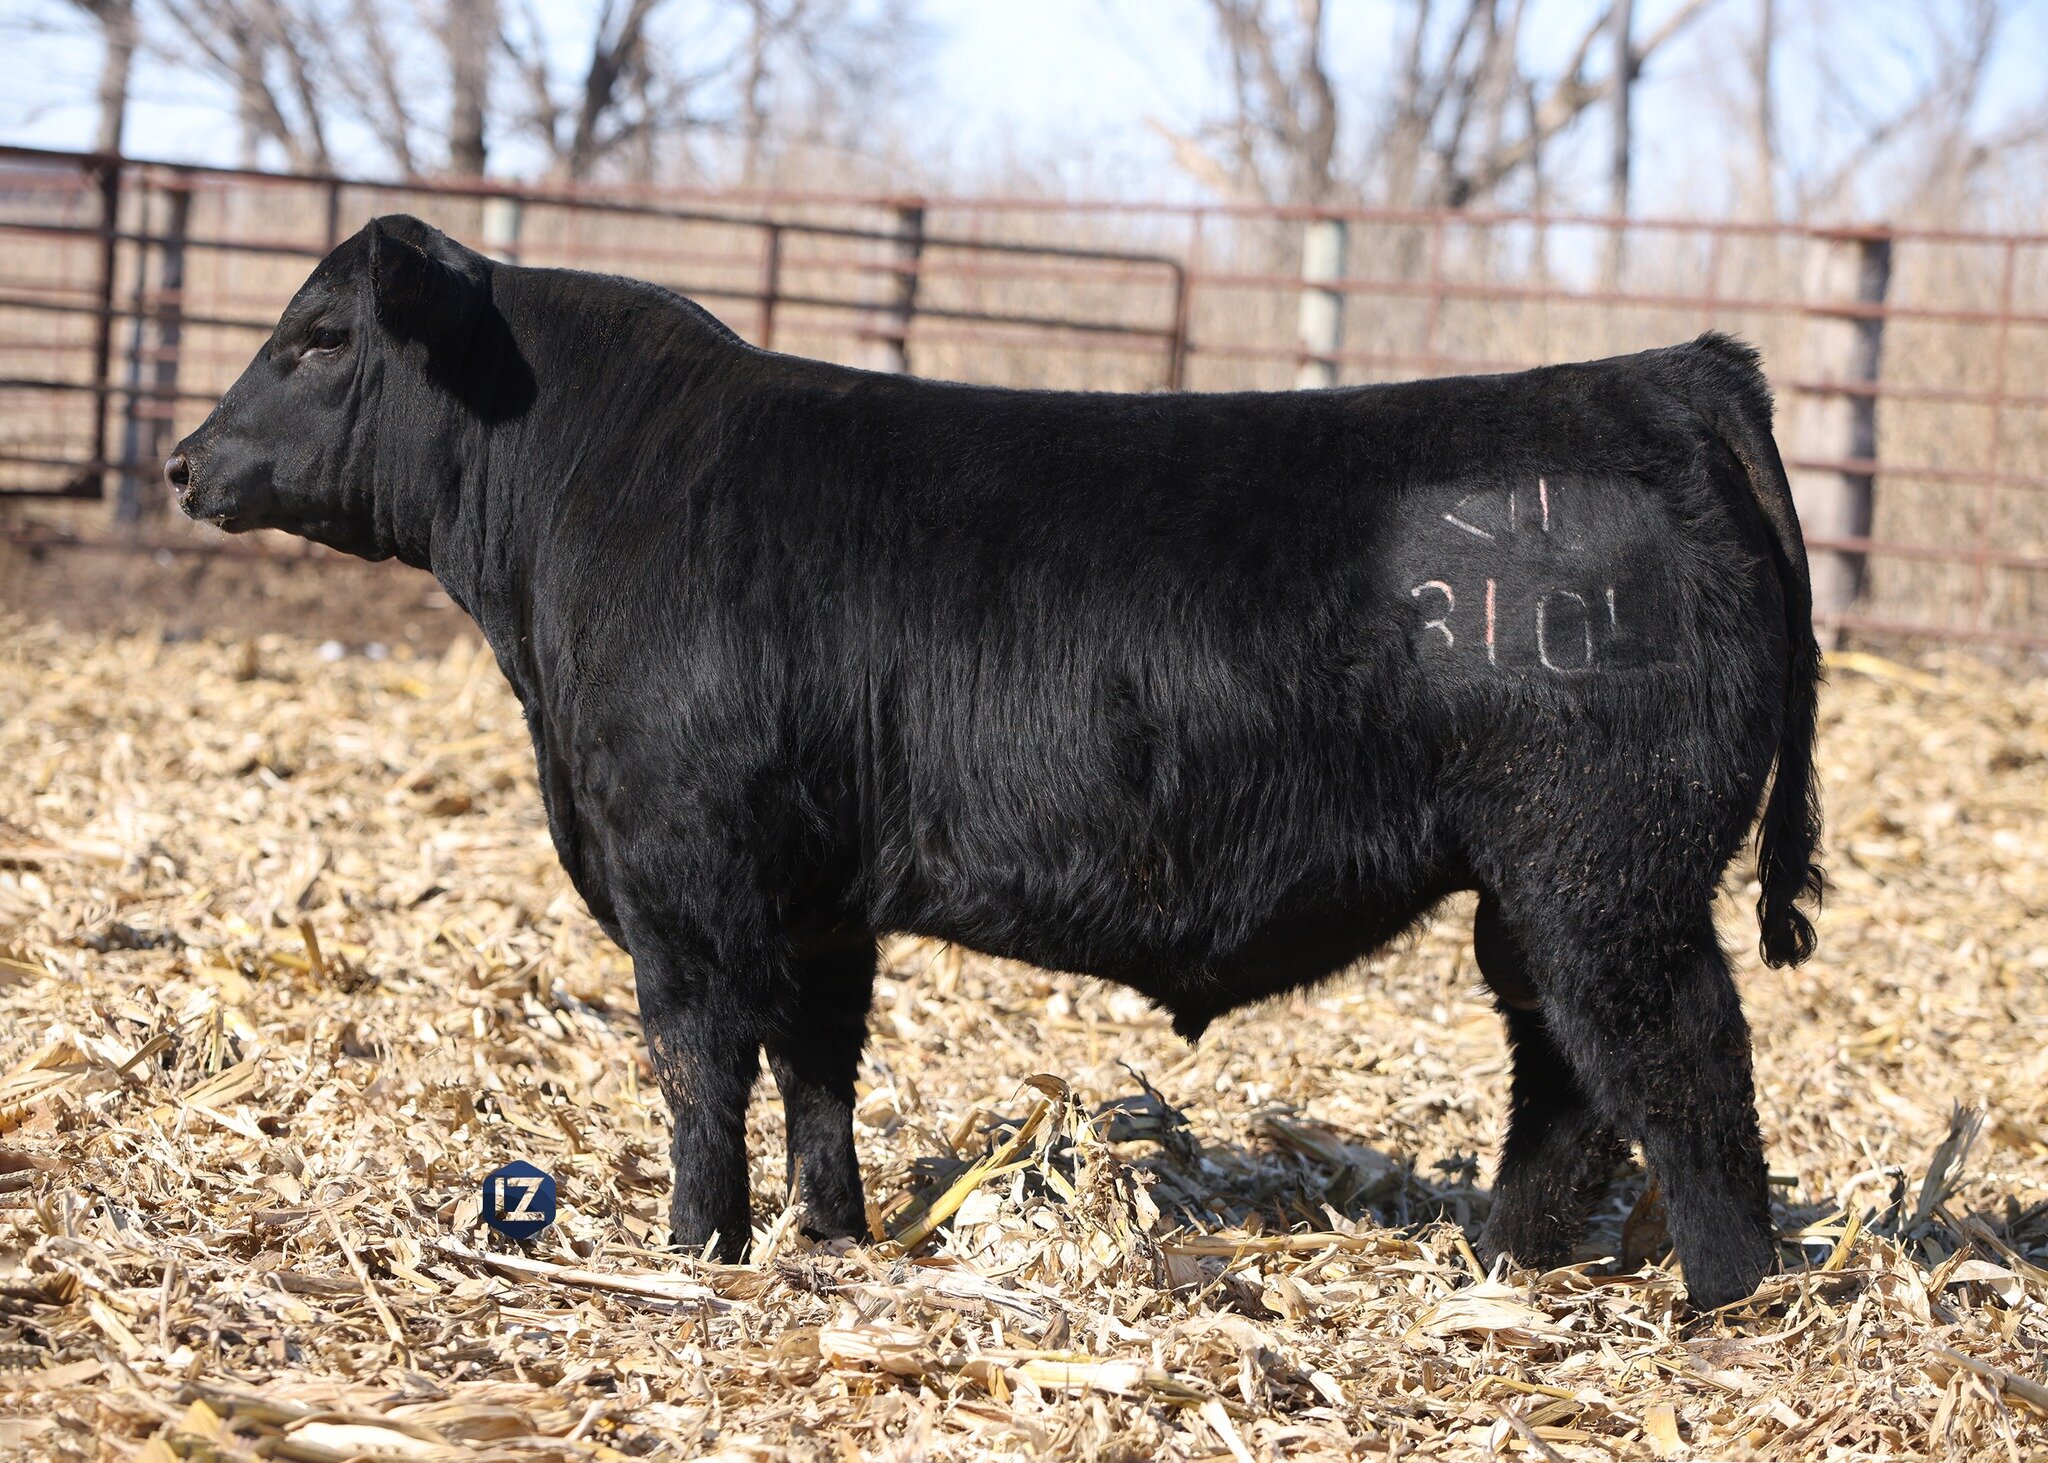 SALE DAY! 

This year's sale is being hosted online through The Livestock Link with bidding now open from 7AM - 7PM! 

View Catalog + Videos + Bidding at: http://www.thelivestocklink.com/catalog/lz_livestock/2024/

Questions? 
Kip Littau // 605.842.6